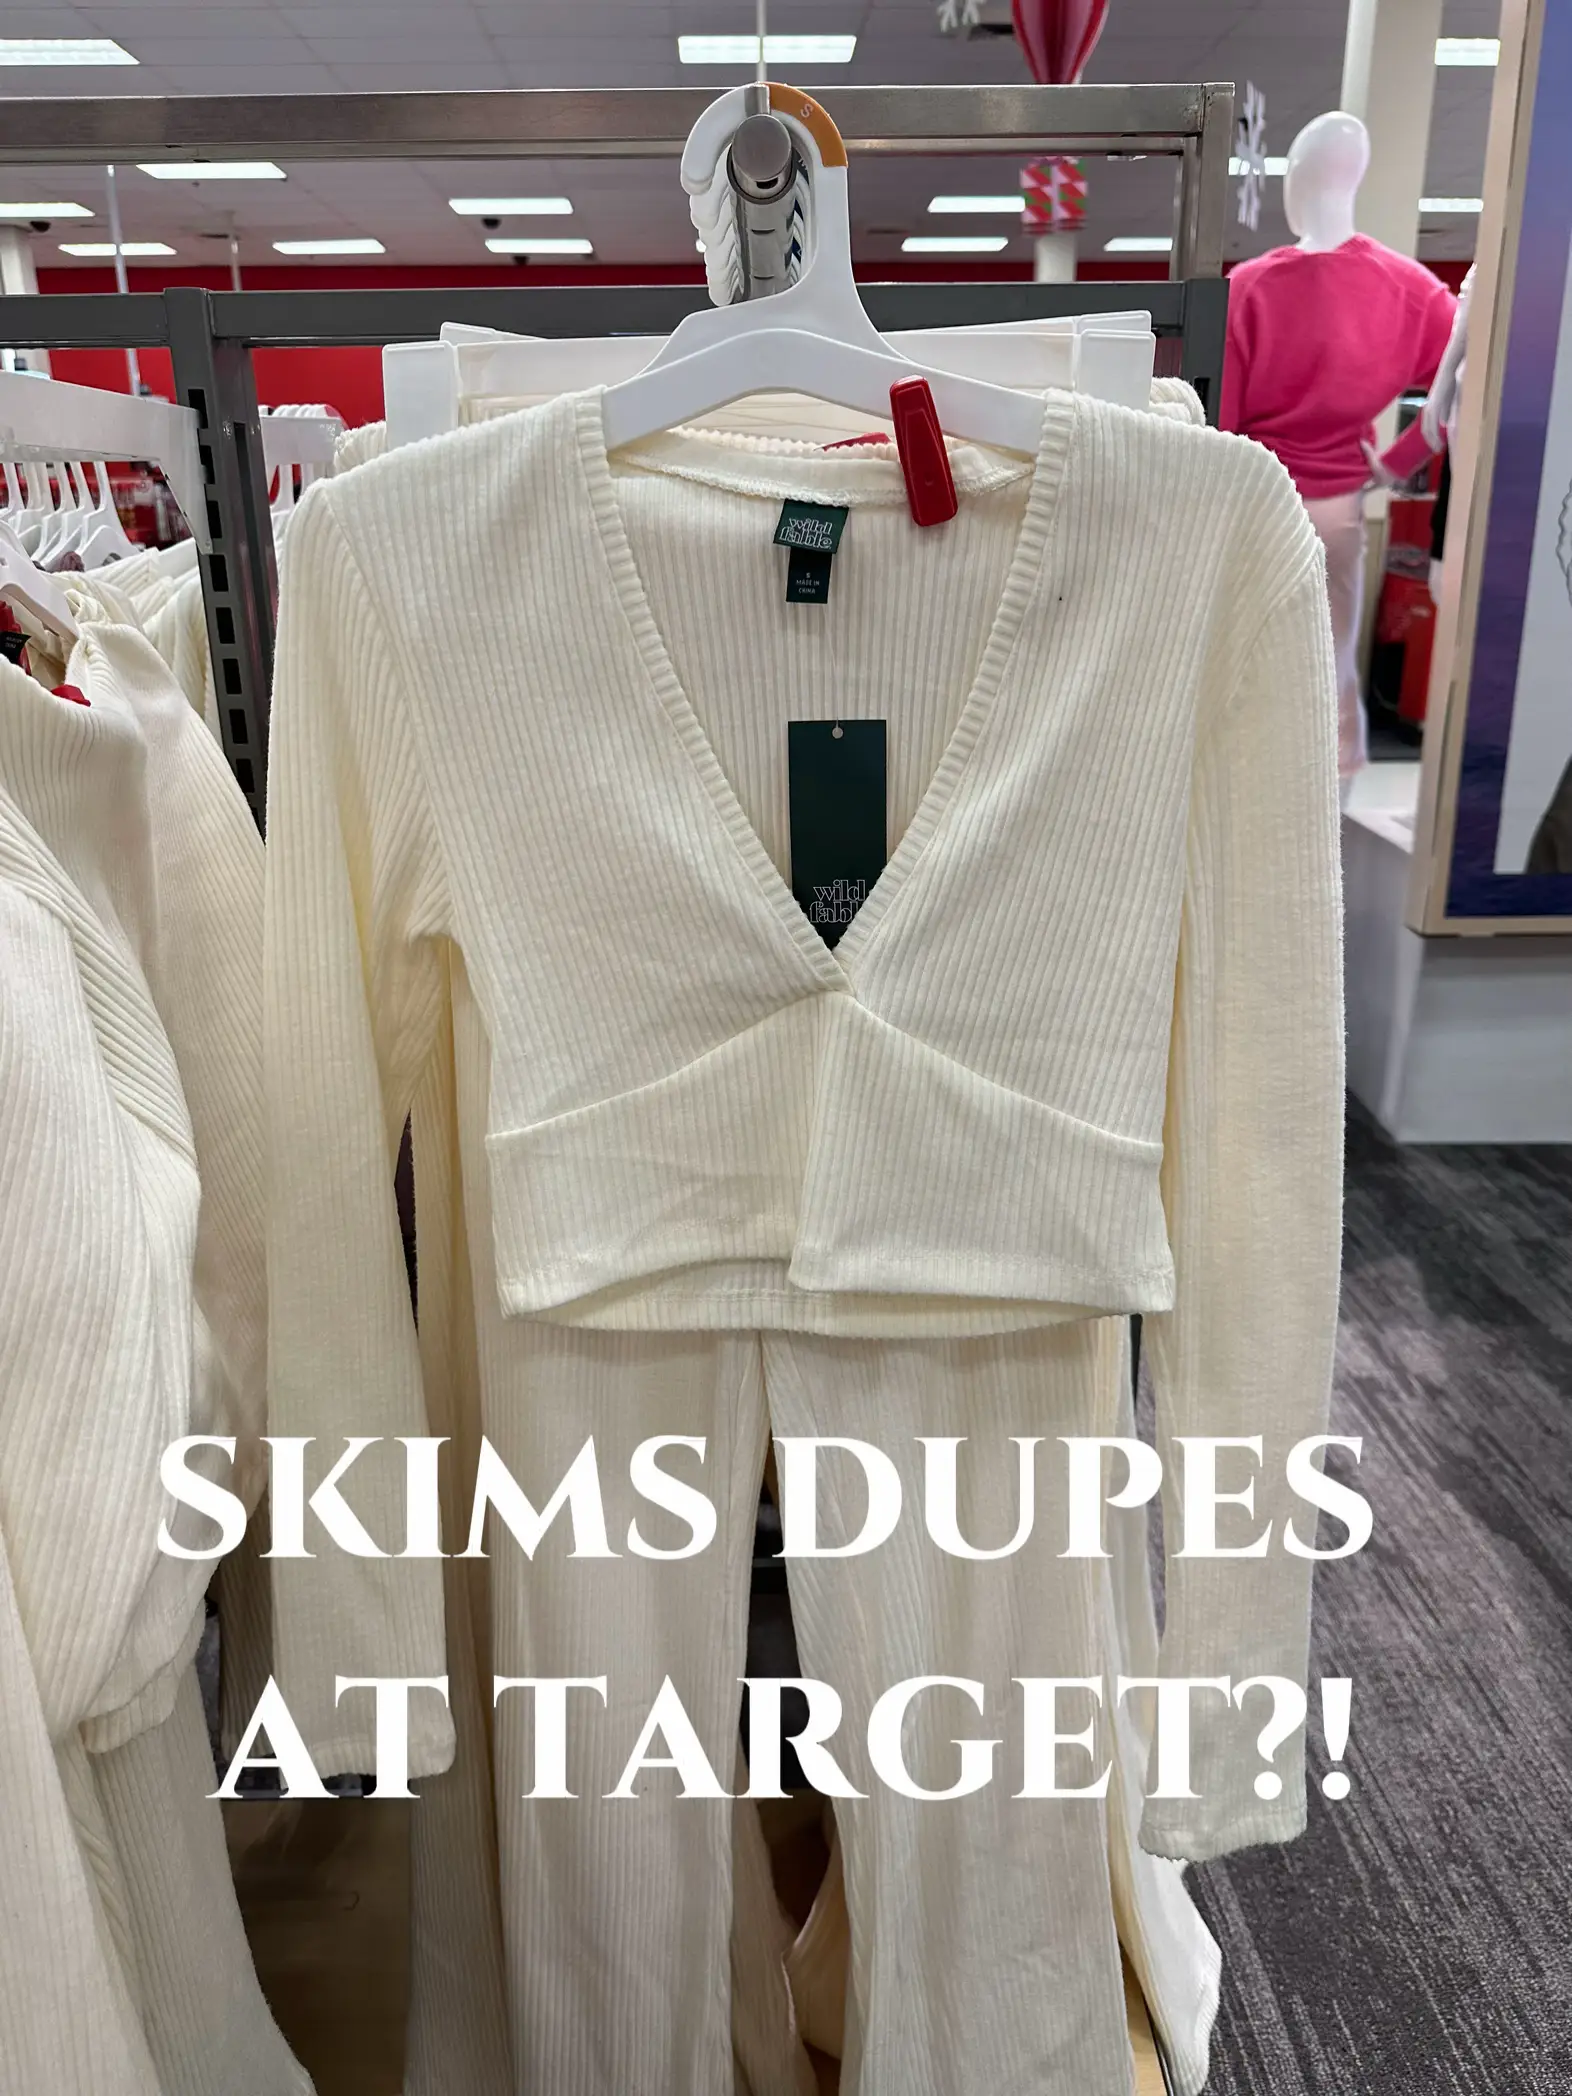 TARGET 🎯 (BEST SKIMS DUPE ) $16.99, Gallery posted by The Soft Nurse